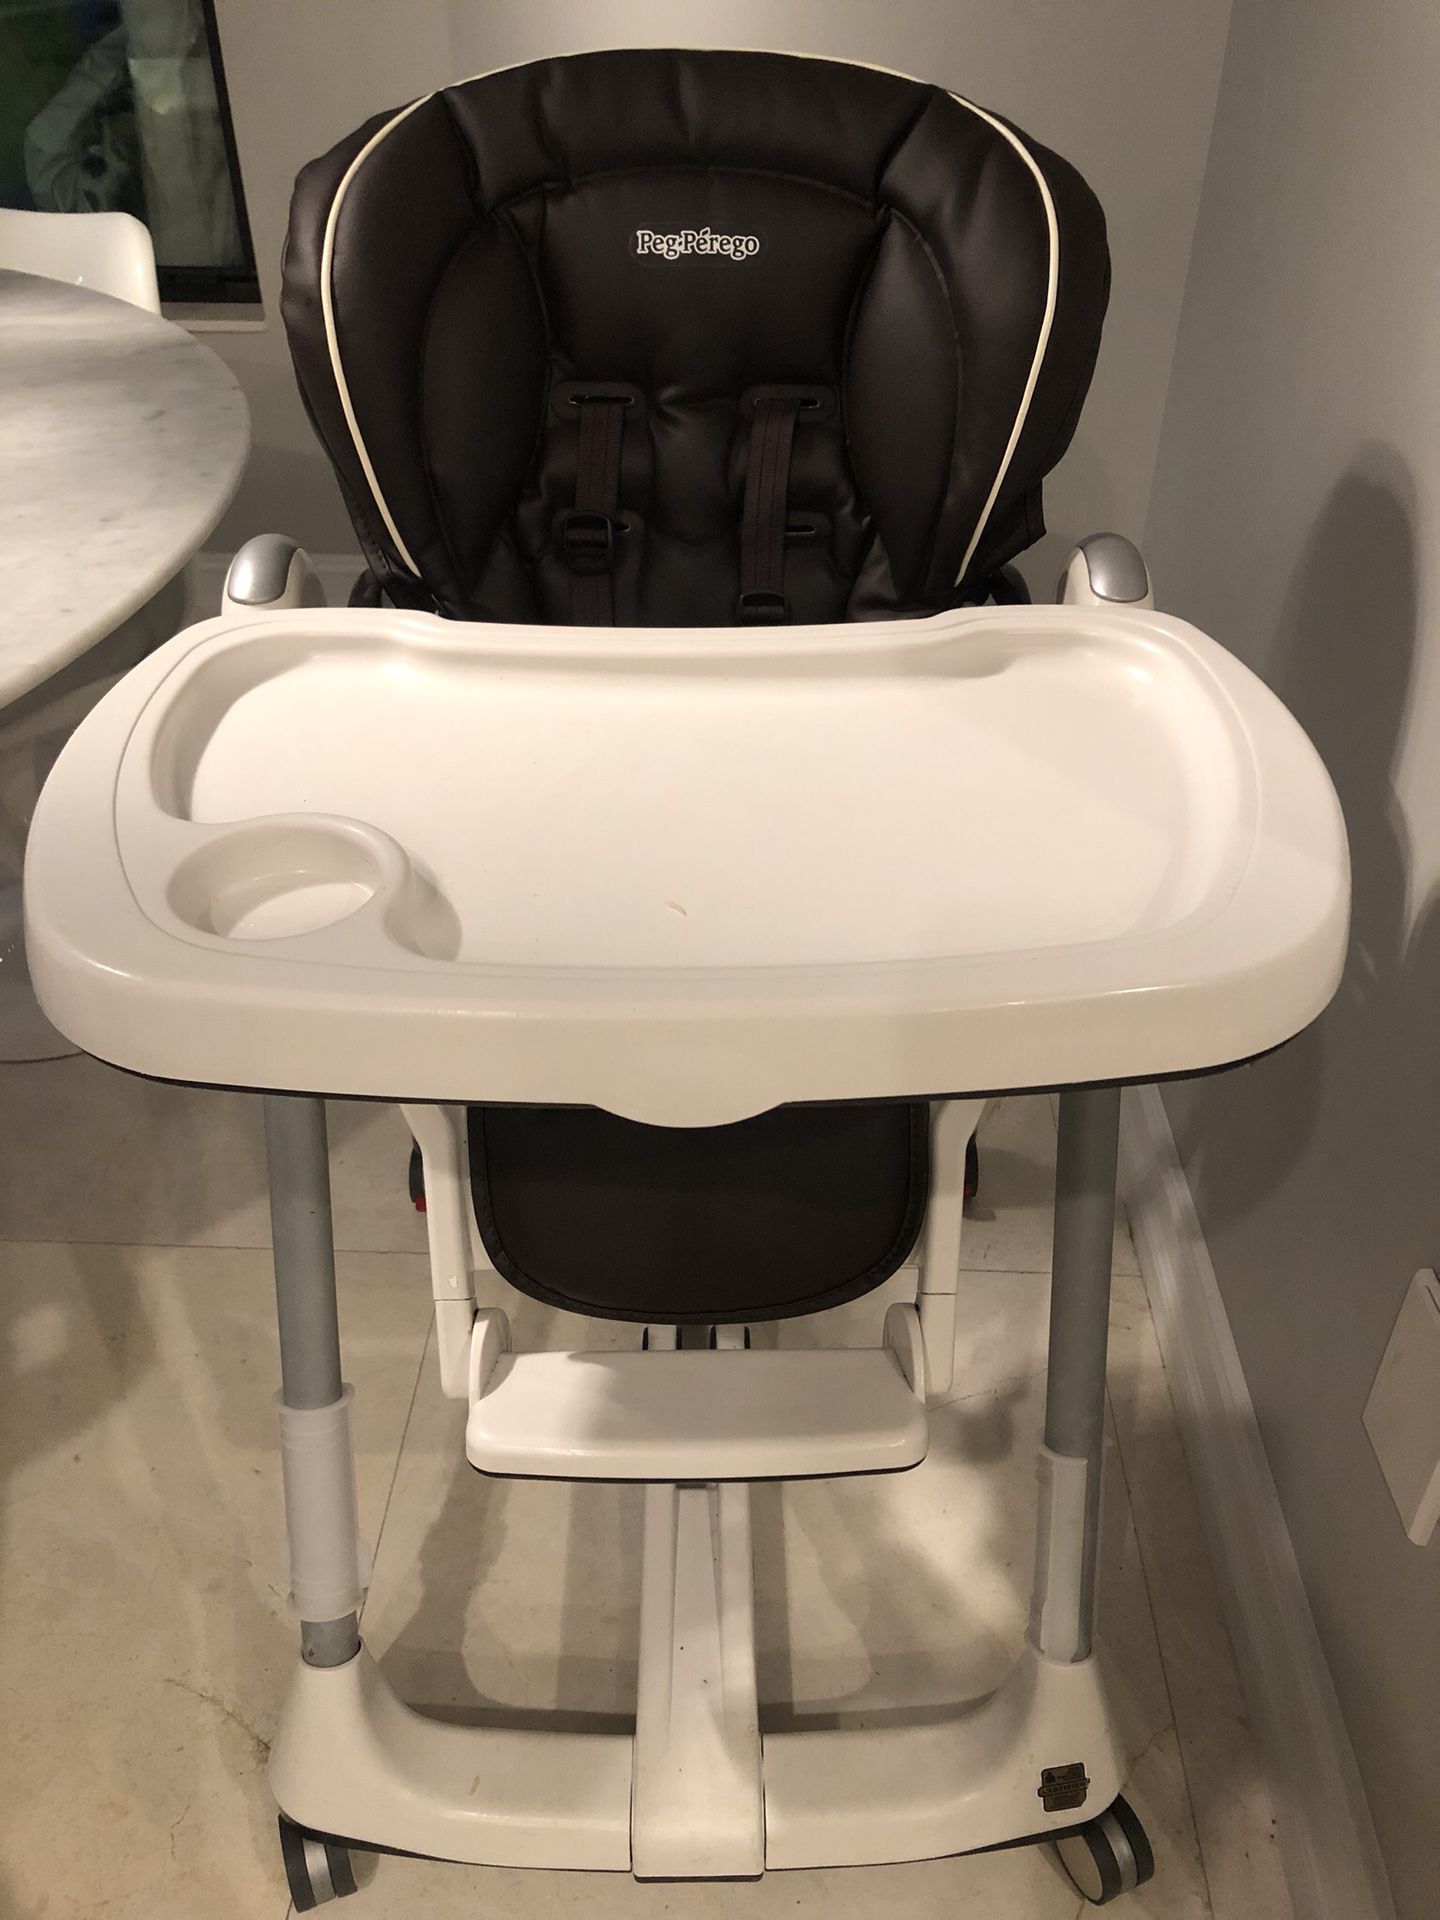 Peg Perego Prima Pappa High Chair, Cacao